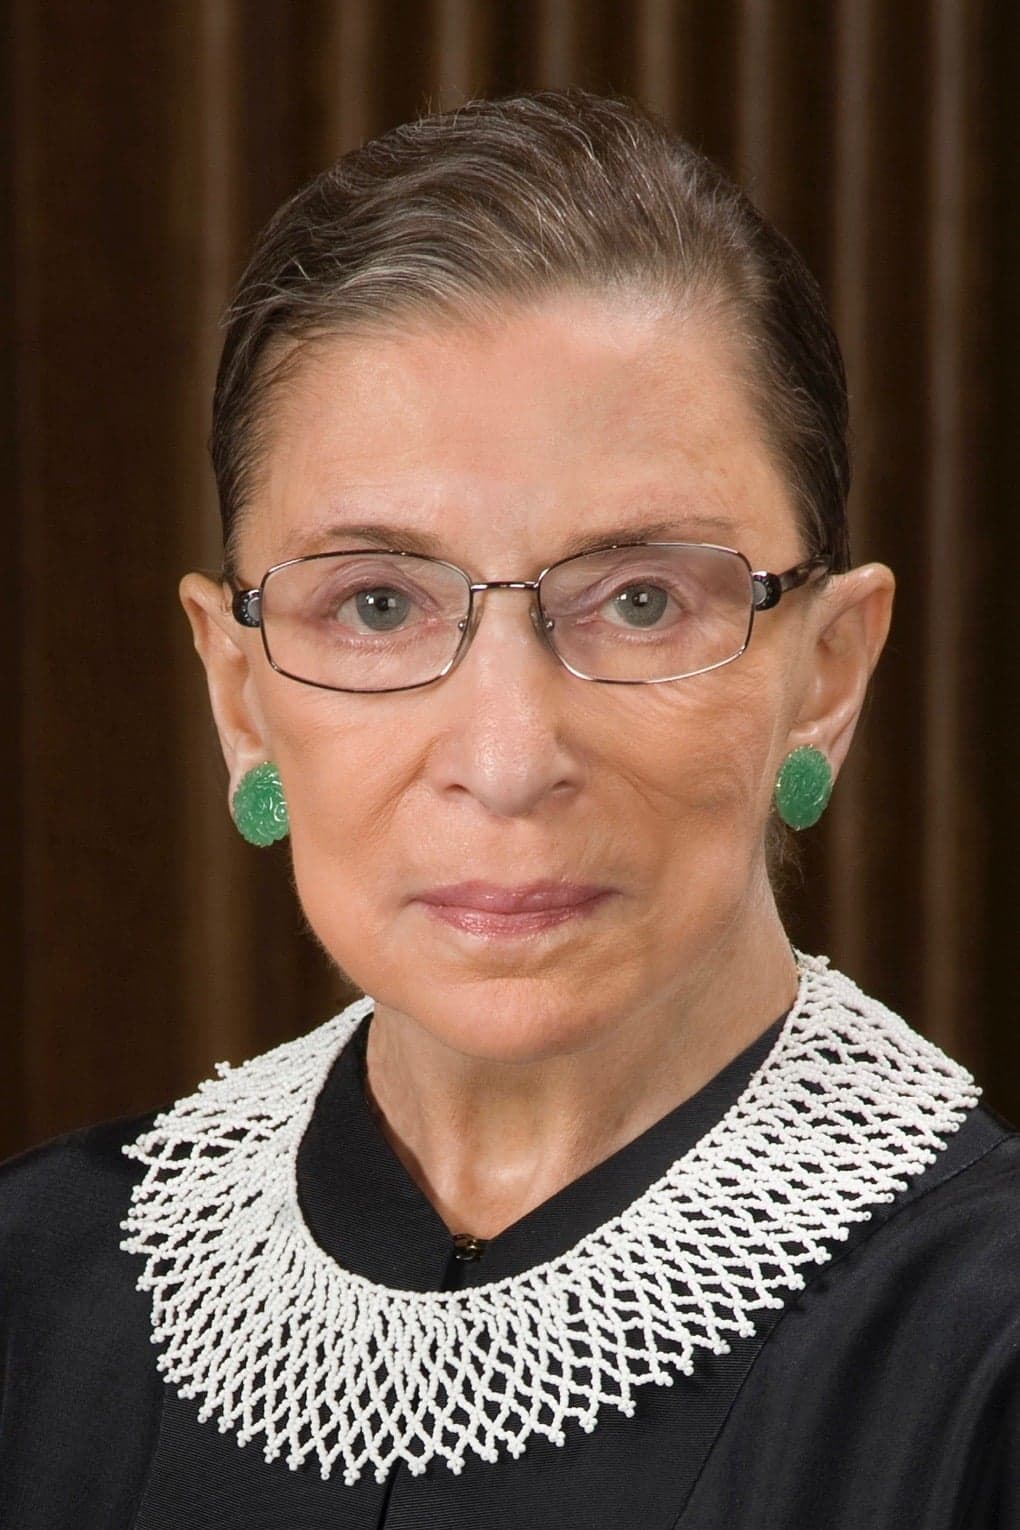 Ruth Bader Ginsburg | Self (archive footage)